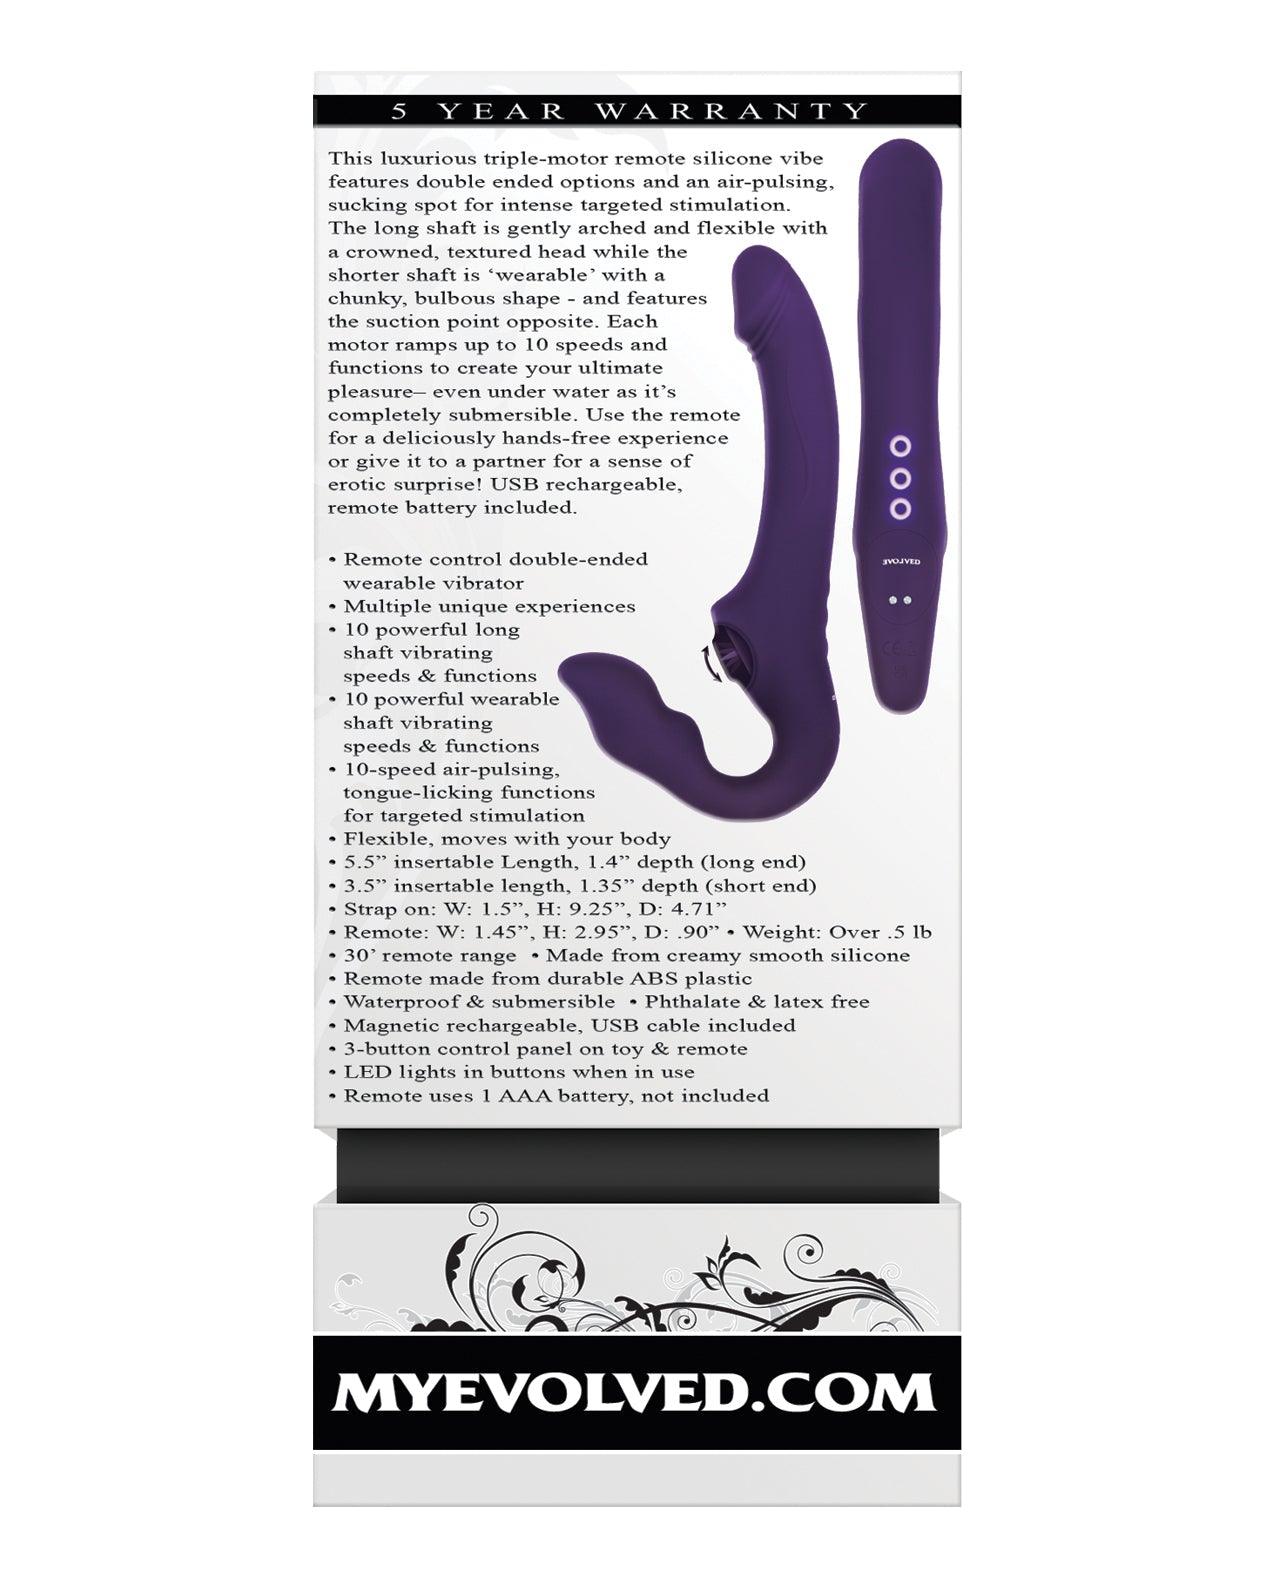 Evolved 2 Become 1 Strapless Strap On - Purple - {{ SEXYEONE }}